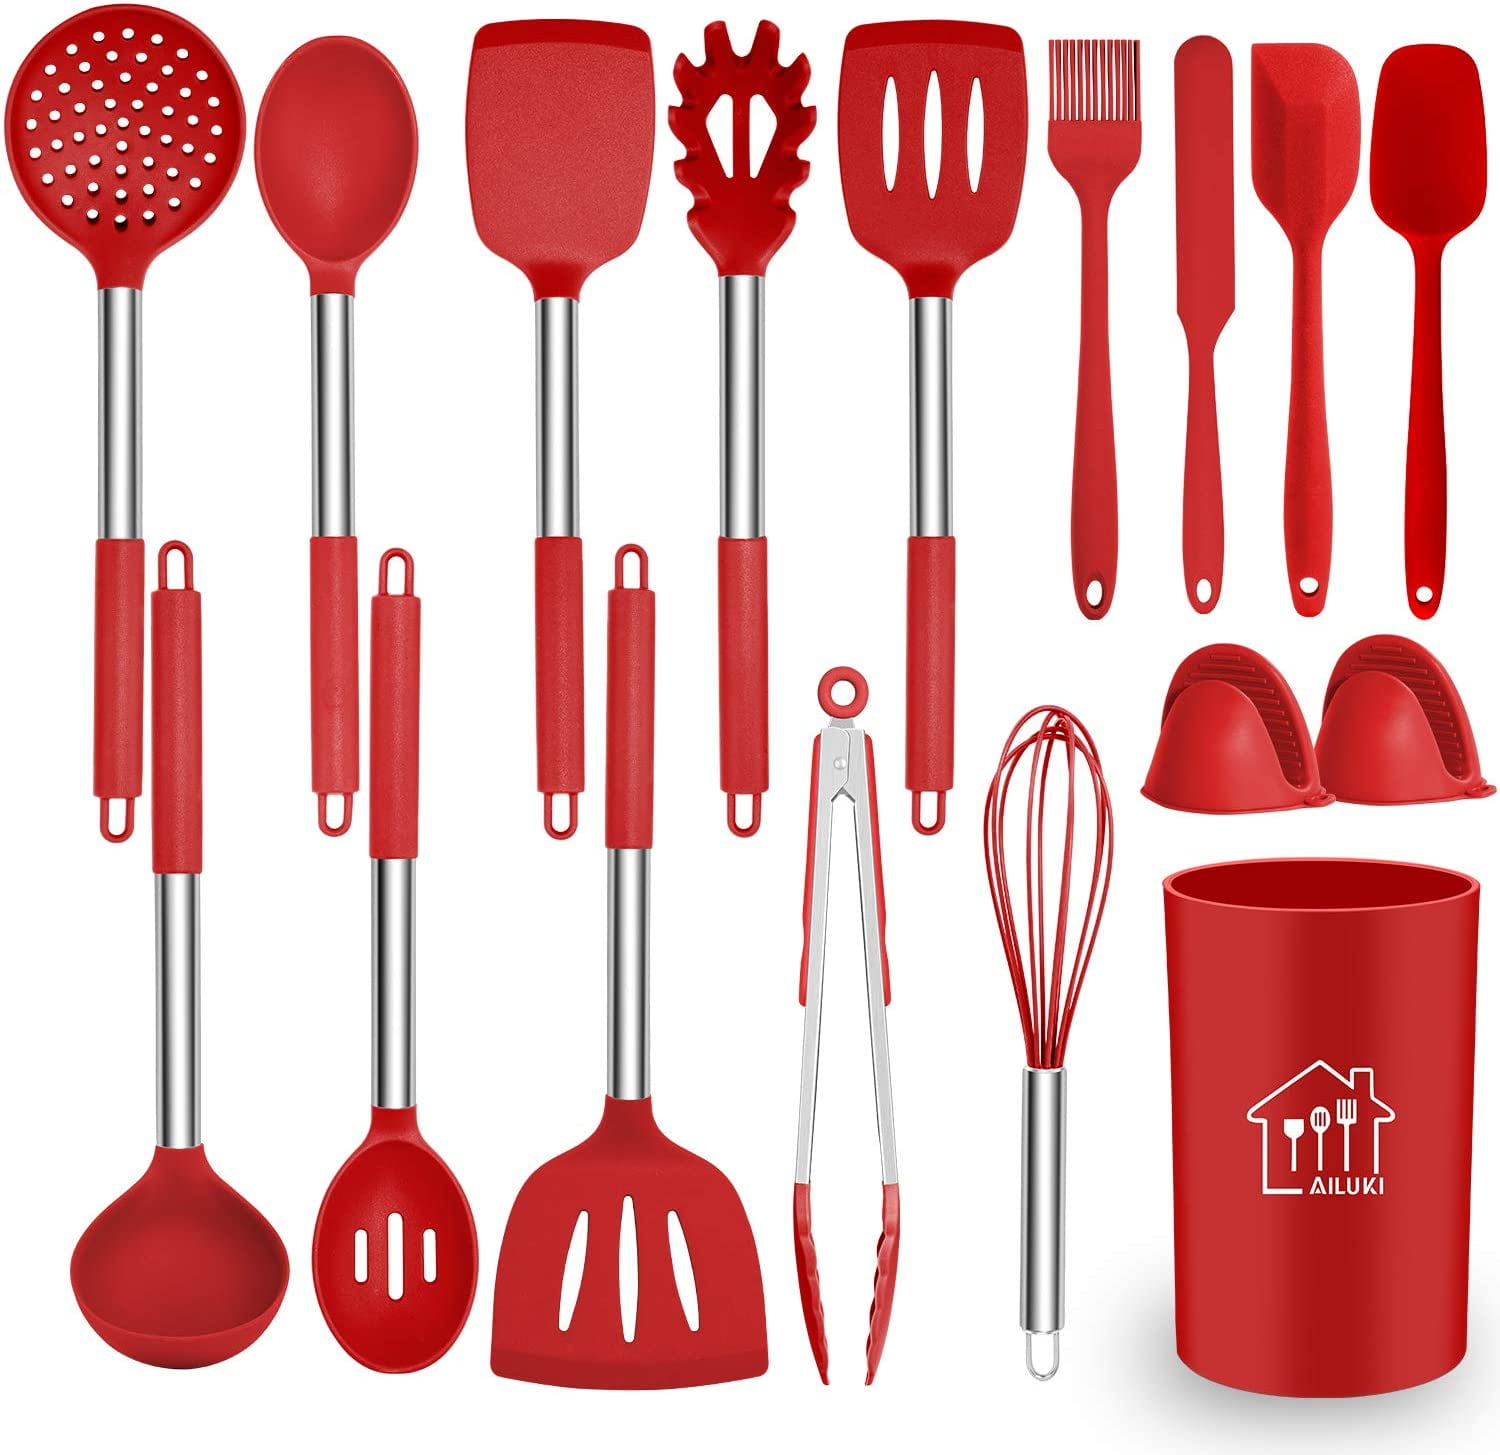 Details about   17 Pcs Silicone Cooking Kitchen Utensils Set with Holder Wooden Handles BPA Free 